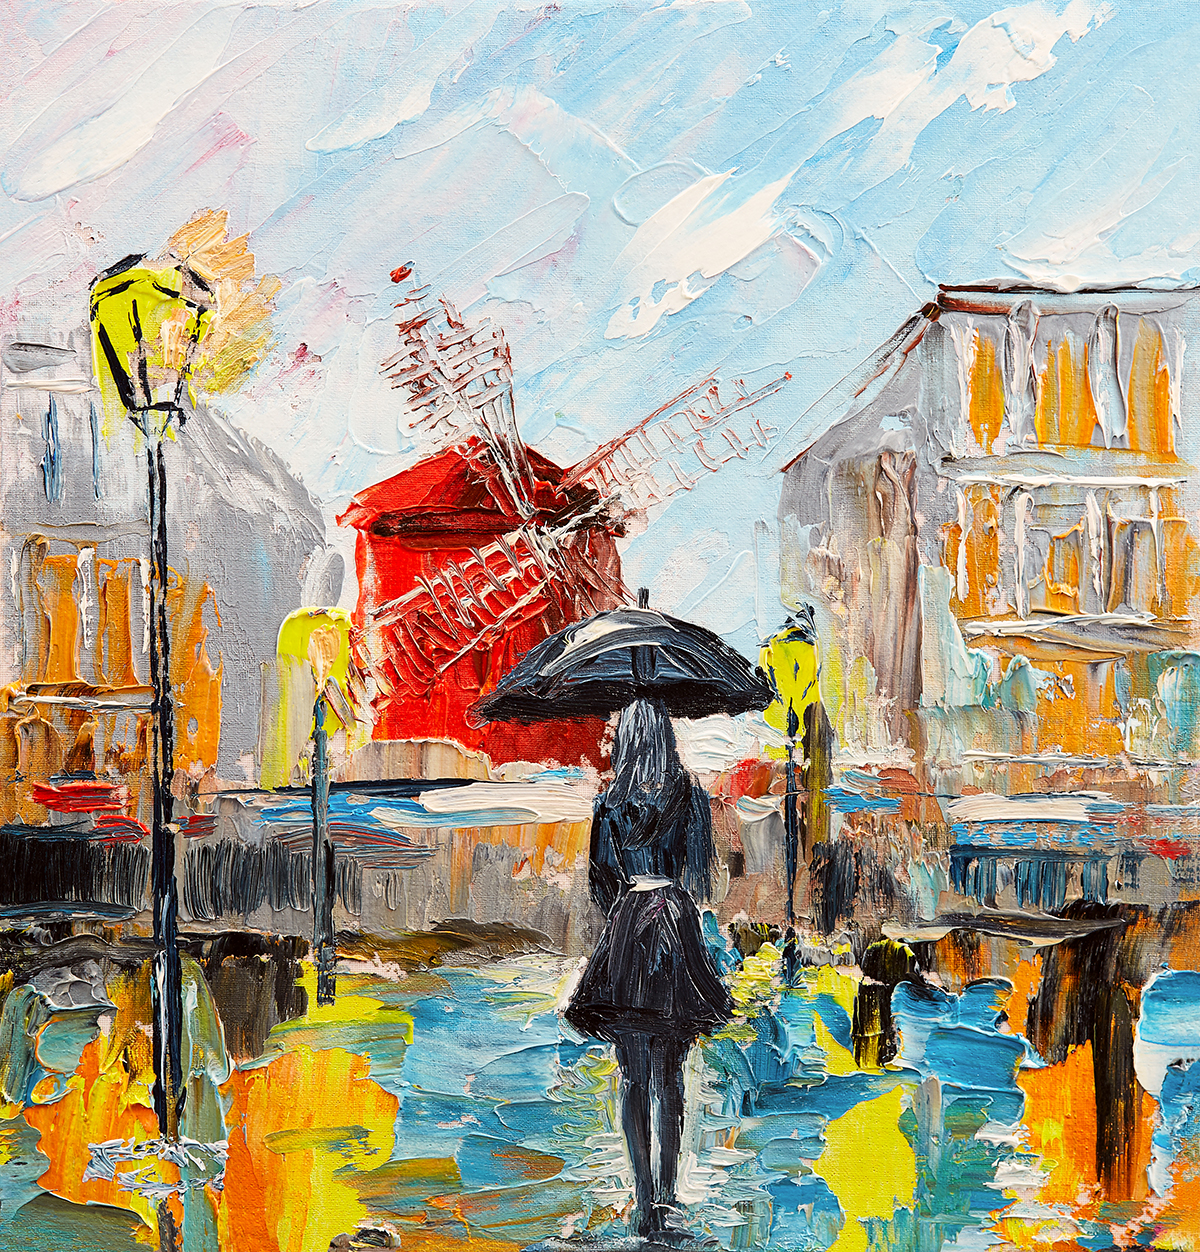 A painting of a woman walking with an umbrella